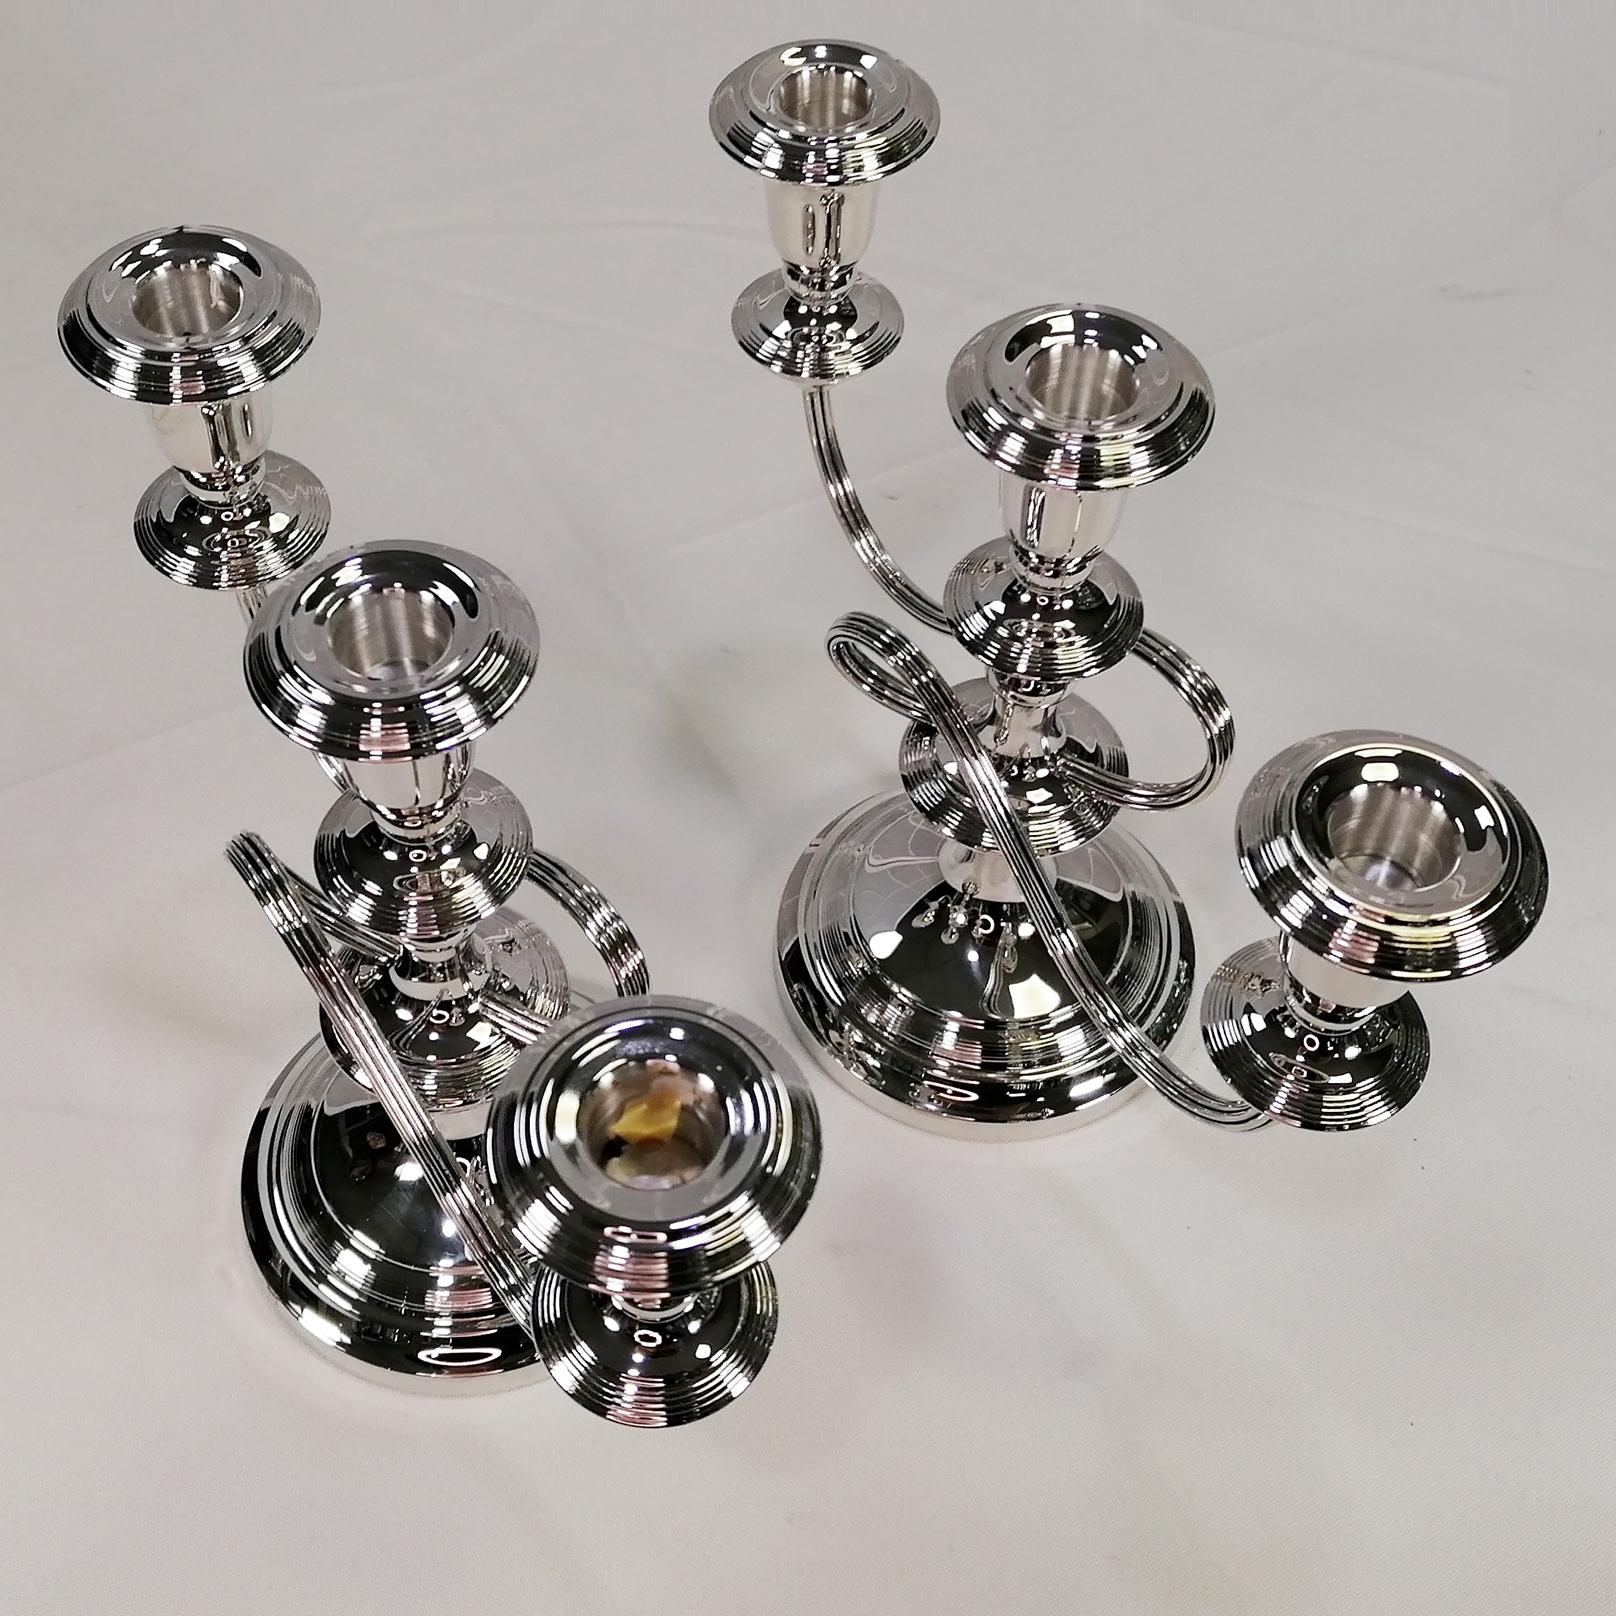 20th Century Italian solid Silver Pr. of Candelabras For Sale 10